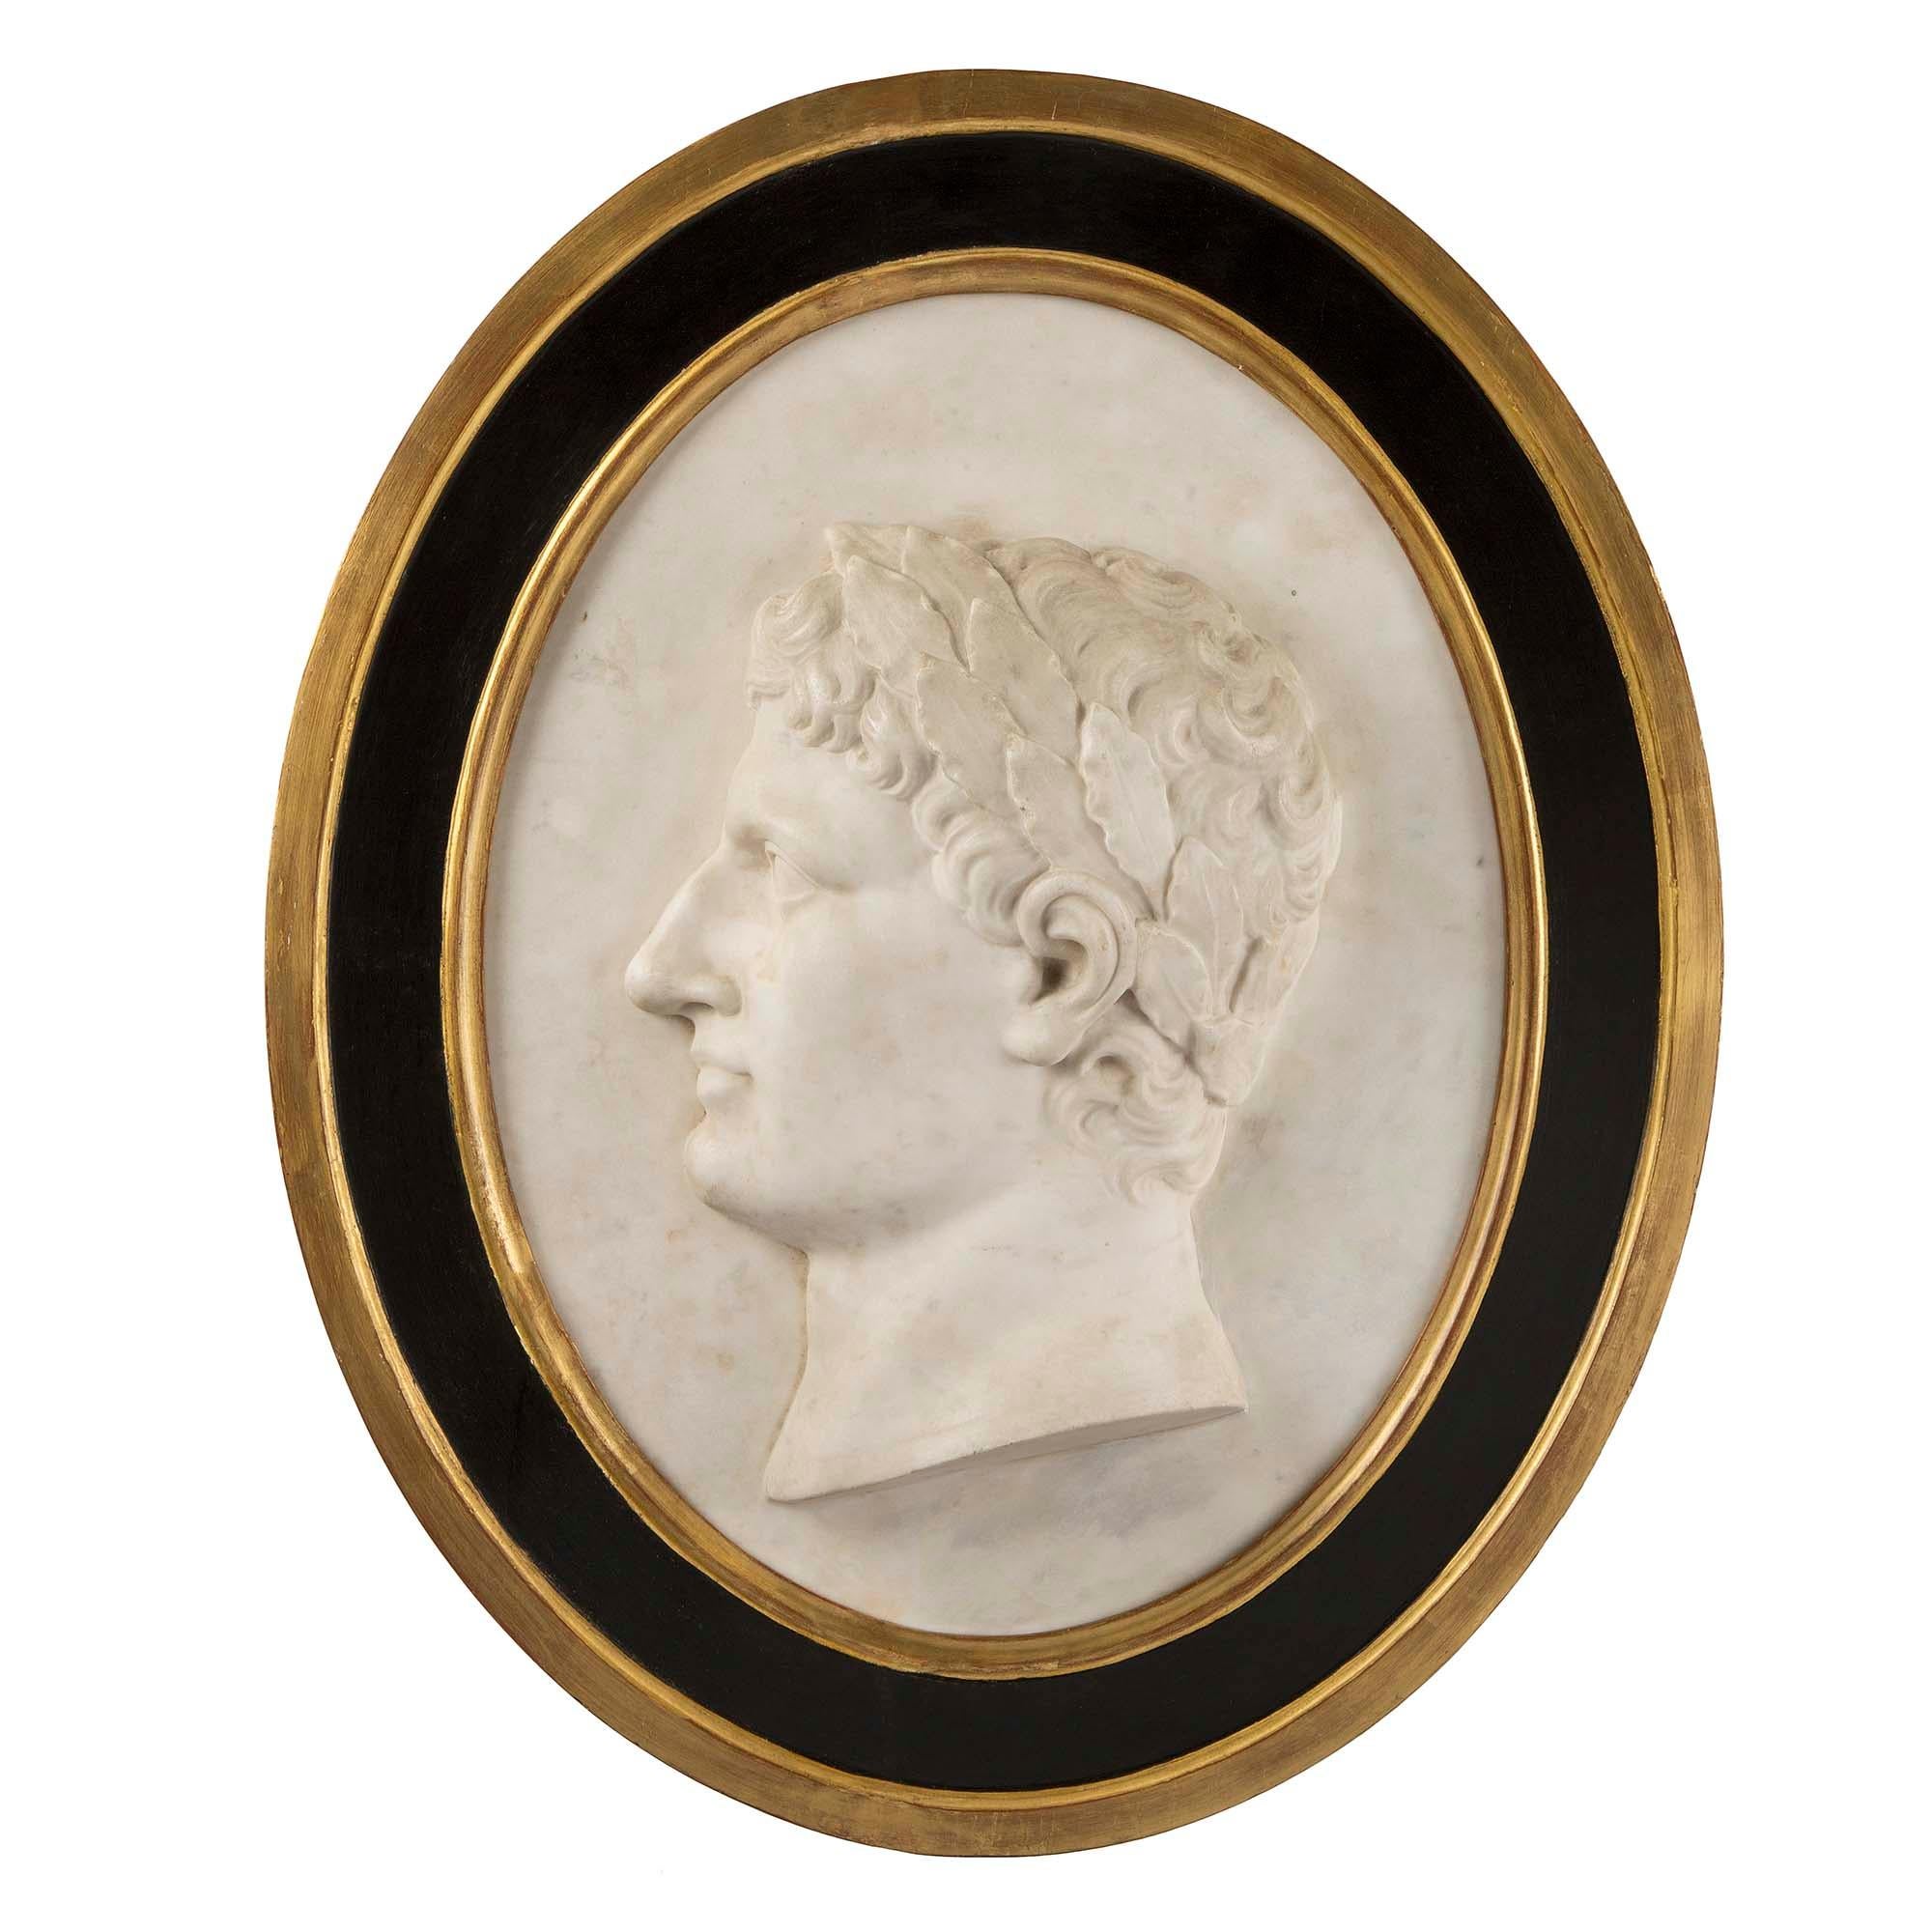 A very handsome Italian 18th century white Carrara marble and giltwood plaque. This finely carved white Carrara marble plaque depicts a young Caesar. All within a black patinated oval frame with moulded giltwood borders. All original patina and gilt